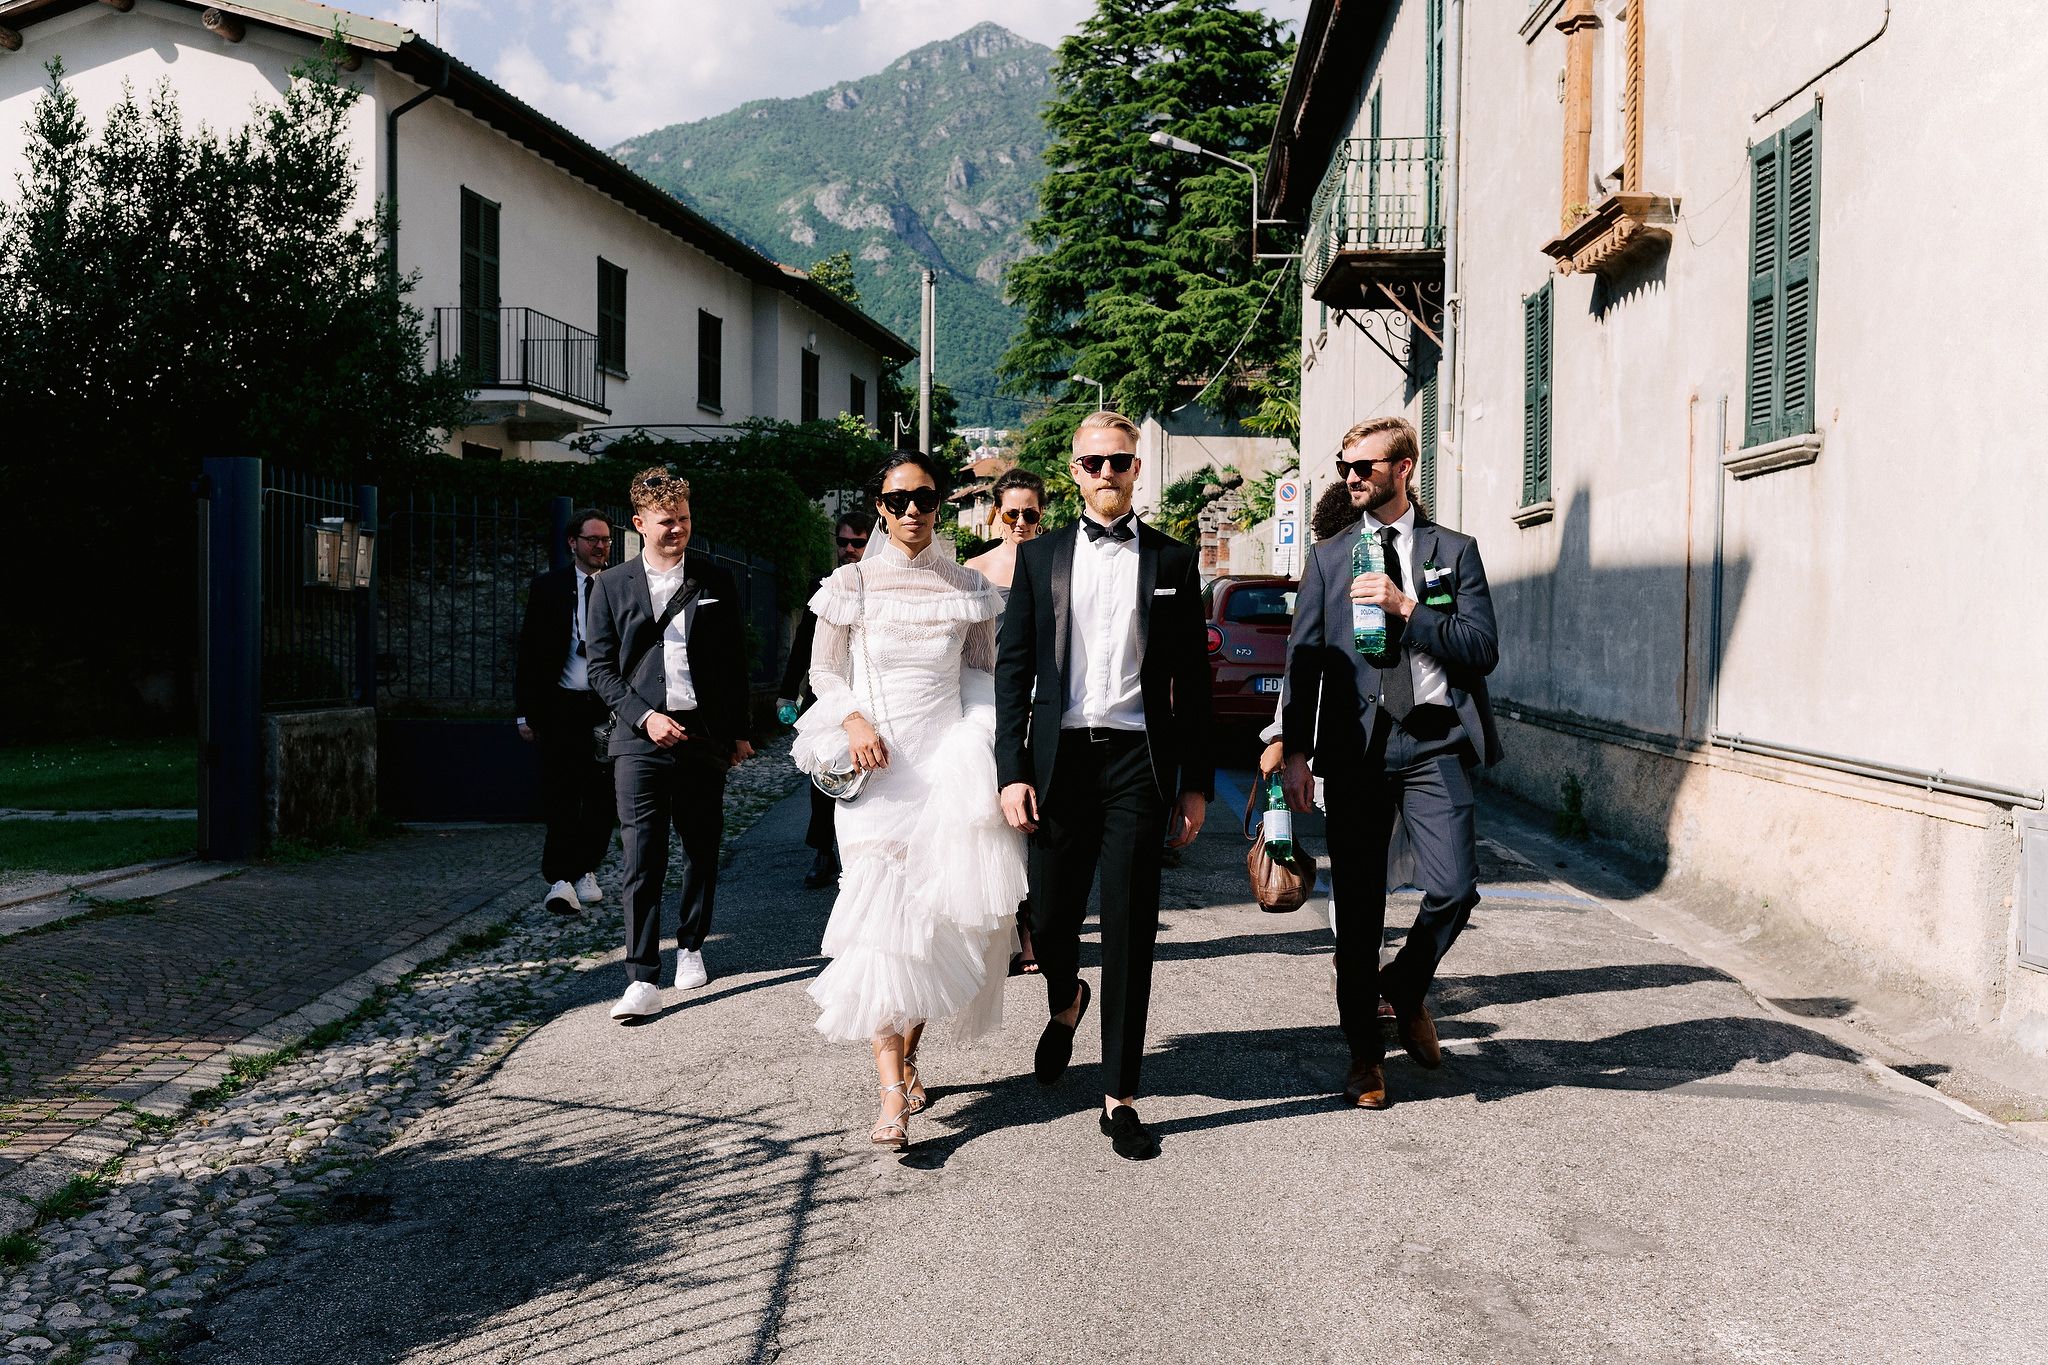 The bride and groom with their friends are walking the streets of Italy. Wedding in Italy image by Jenny Fu Studio